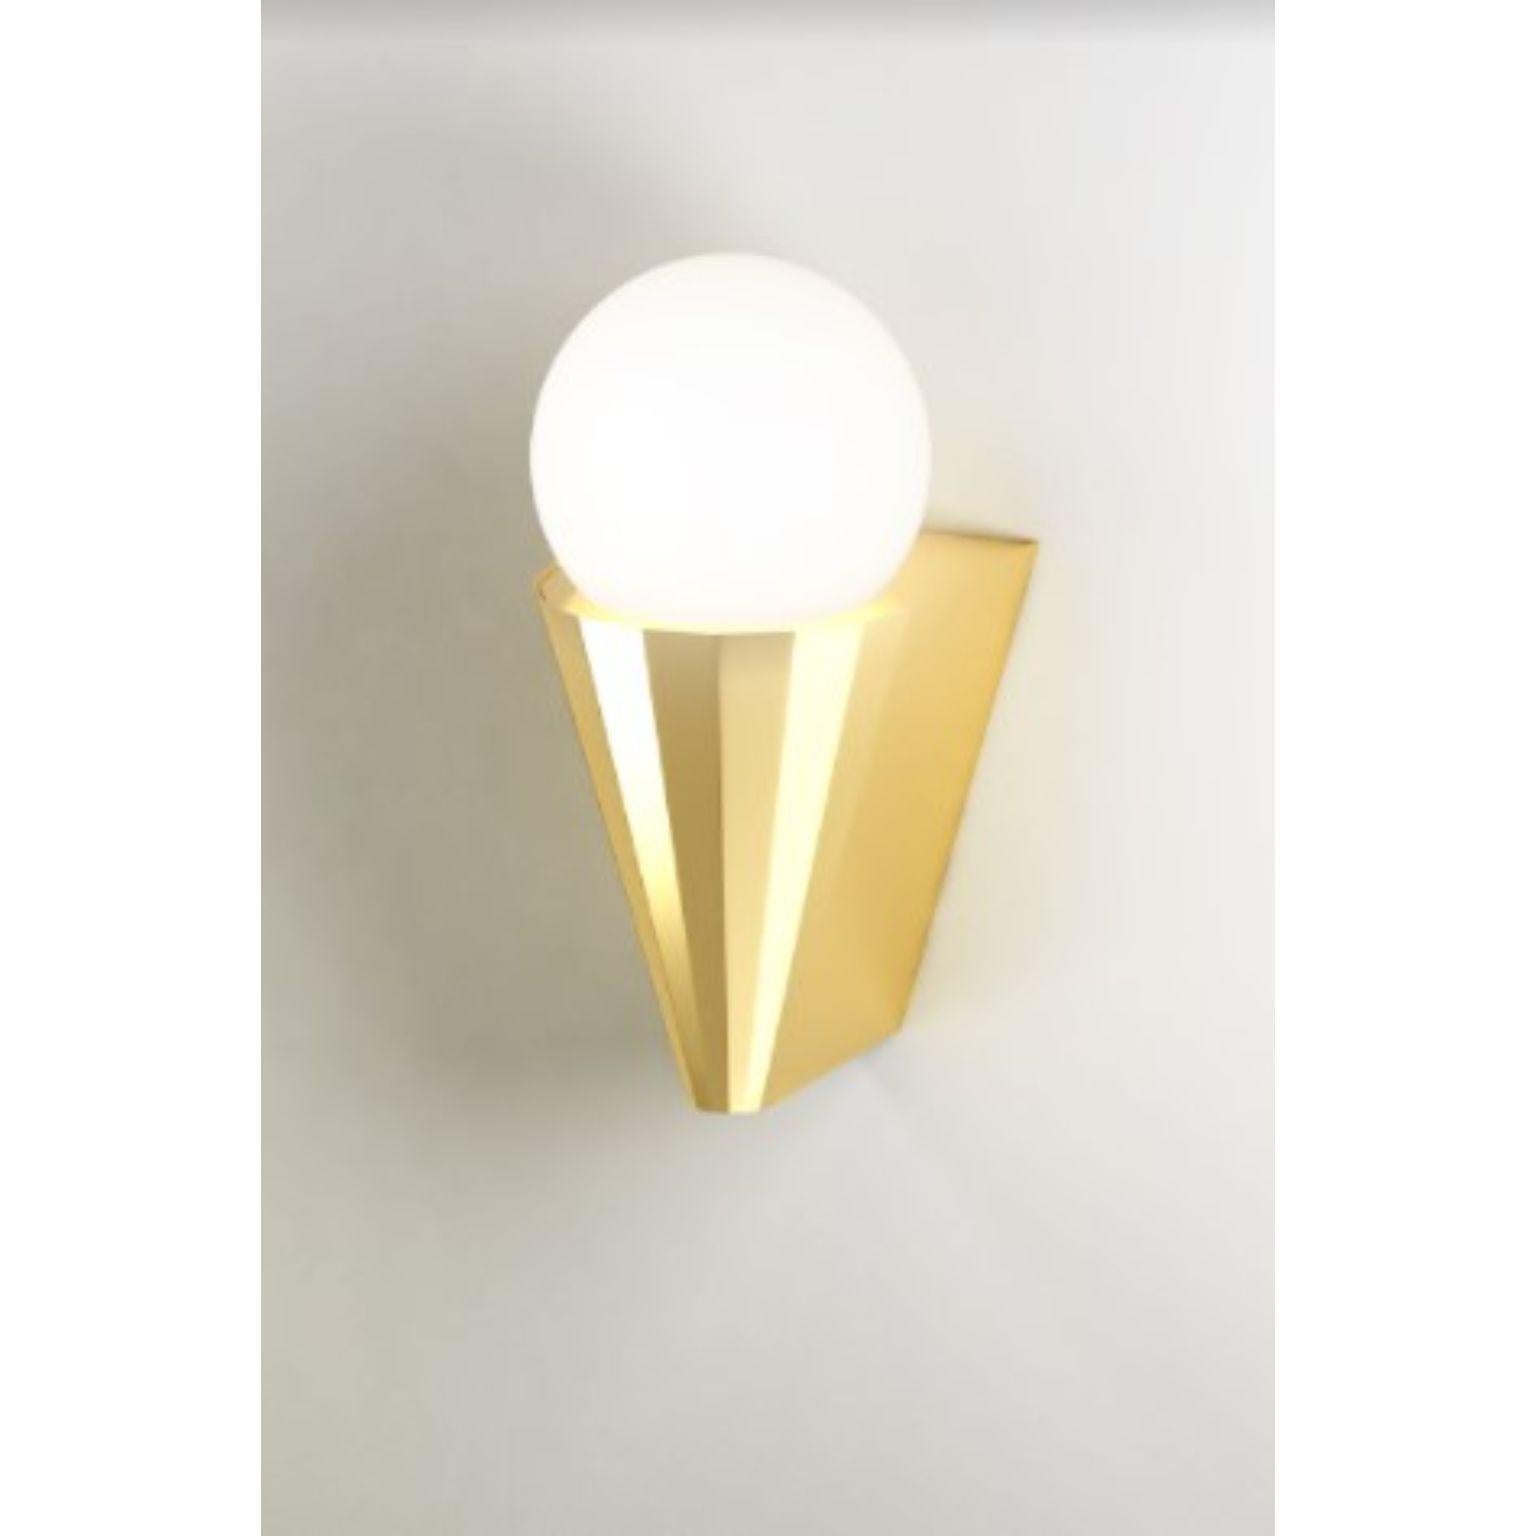 IP cornet polished brass wall light by Emilie Cathelineau
Dimensions: D10 x W12.5 X H21.2 cm
Materials: solid brass, polished brass
Others finishes are available.

All our lamps can be wired according to each country. If sold to the USA it will